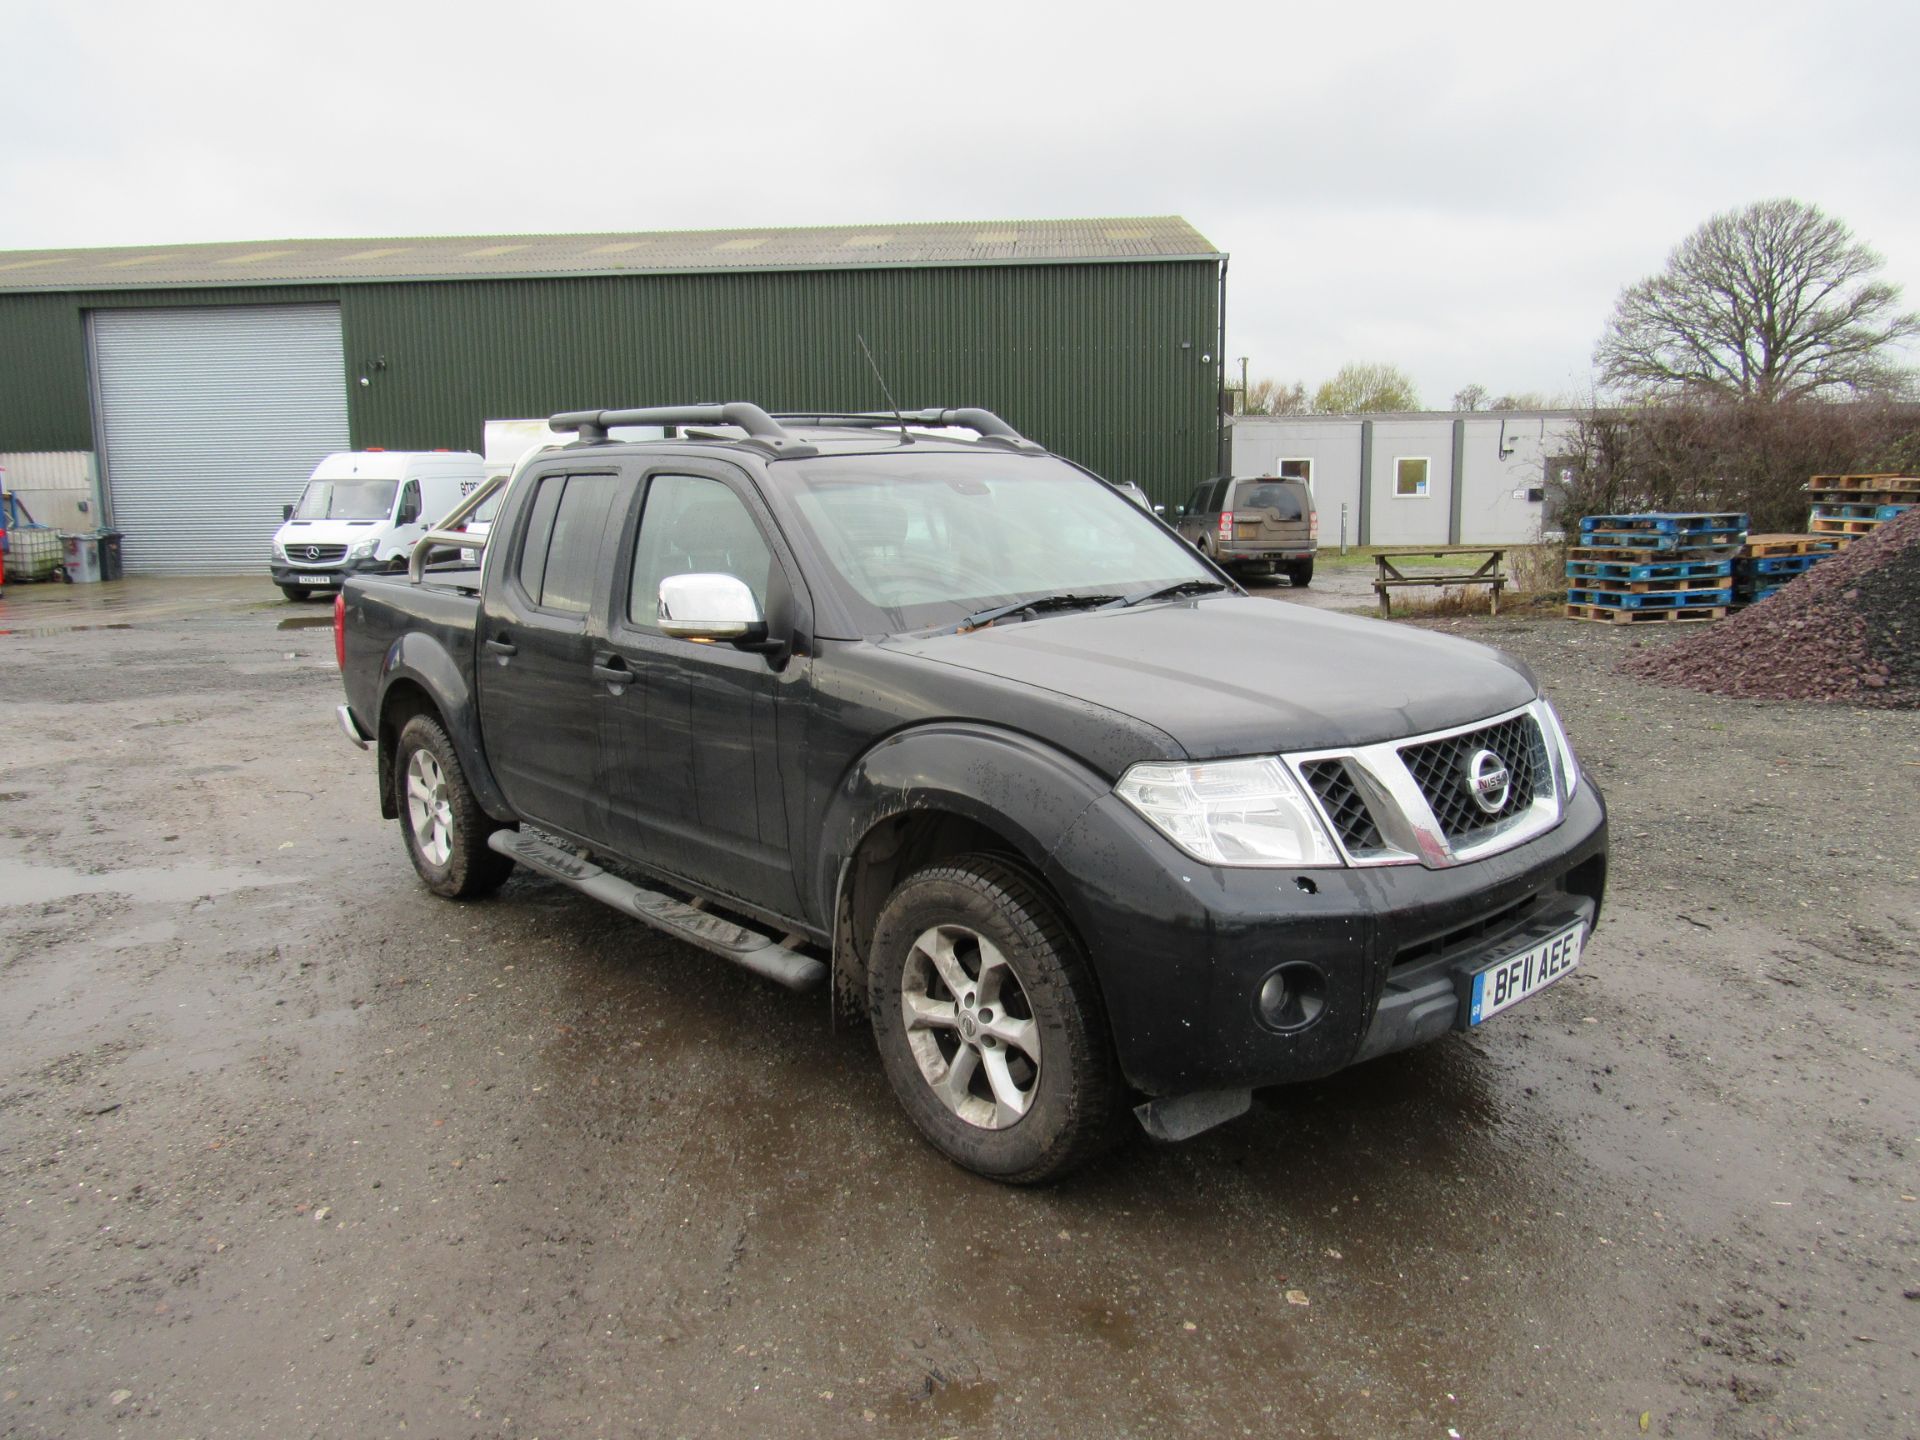 Nissan Navara Tekna 2.5DCI 4WD Auto Double Cab Pick Up, registration BF11 AEE, first registered 25